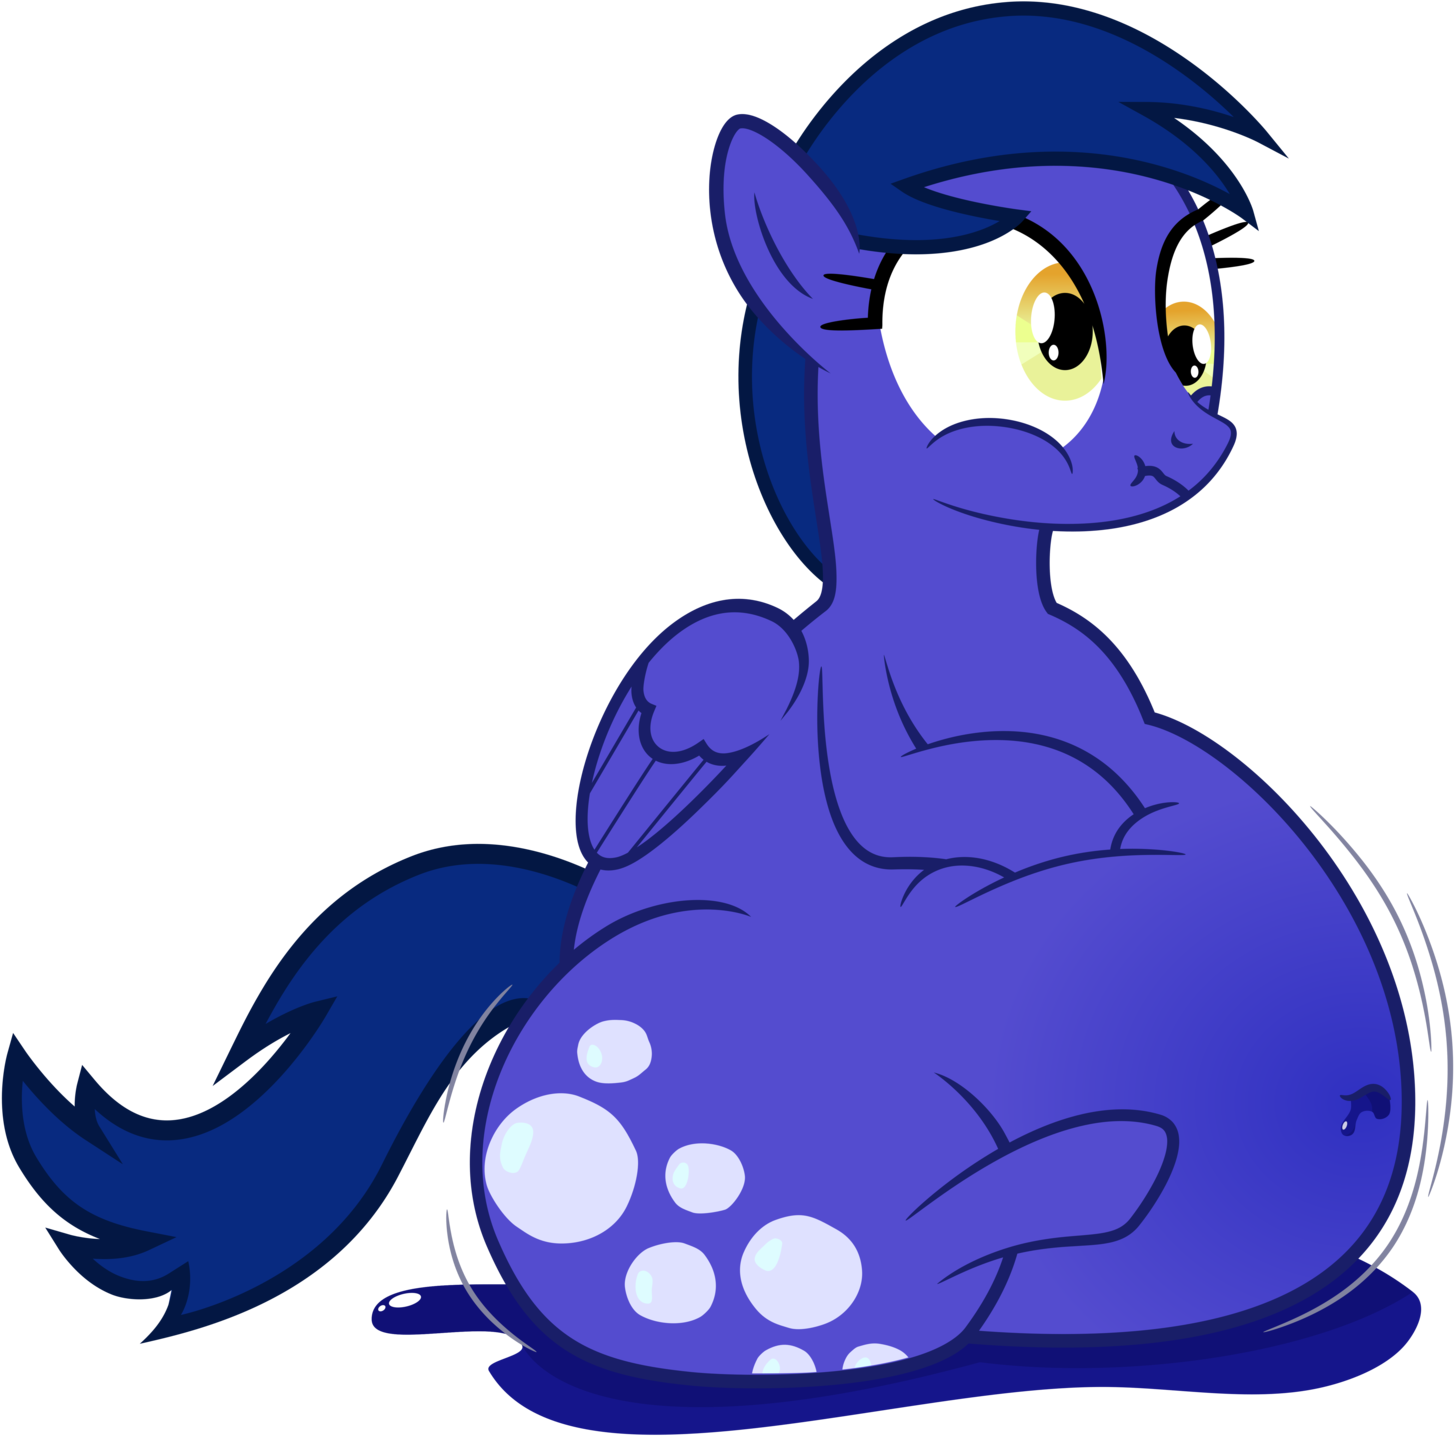 Bewitched Blueberry Muffins Part 2 By Worstsousaphonehorse - Bewitched Blueberry Muffins (1600x1600)